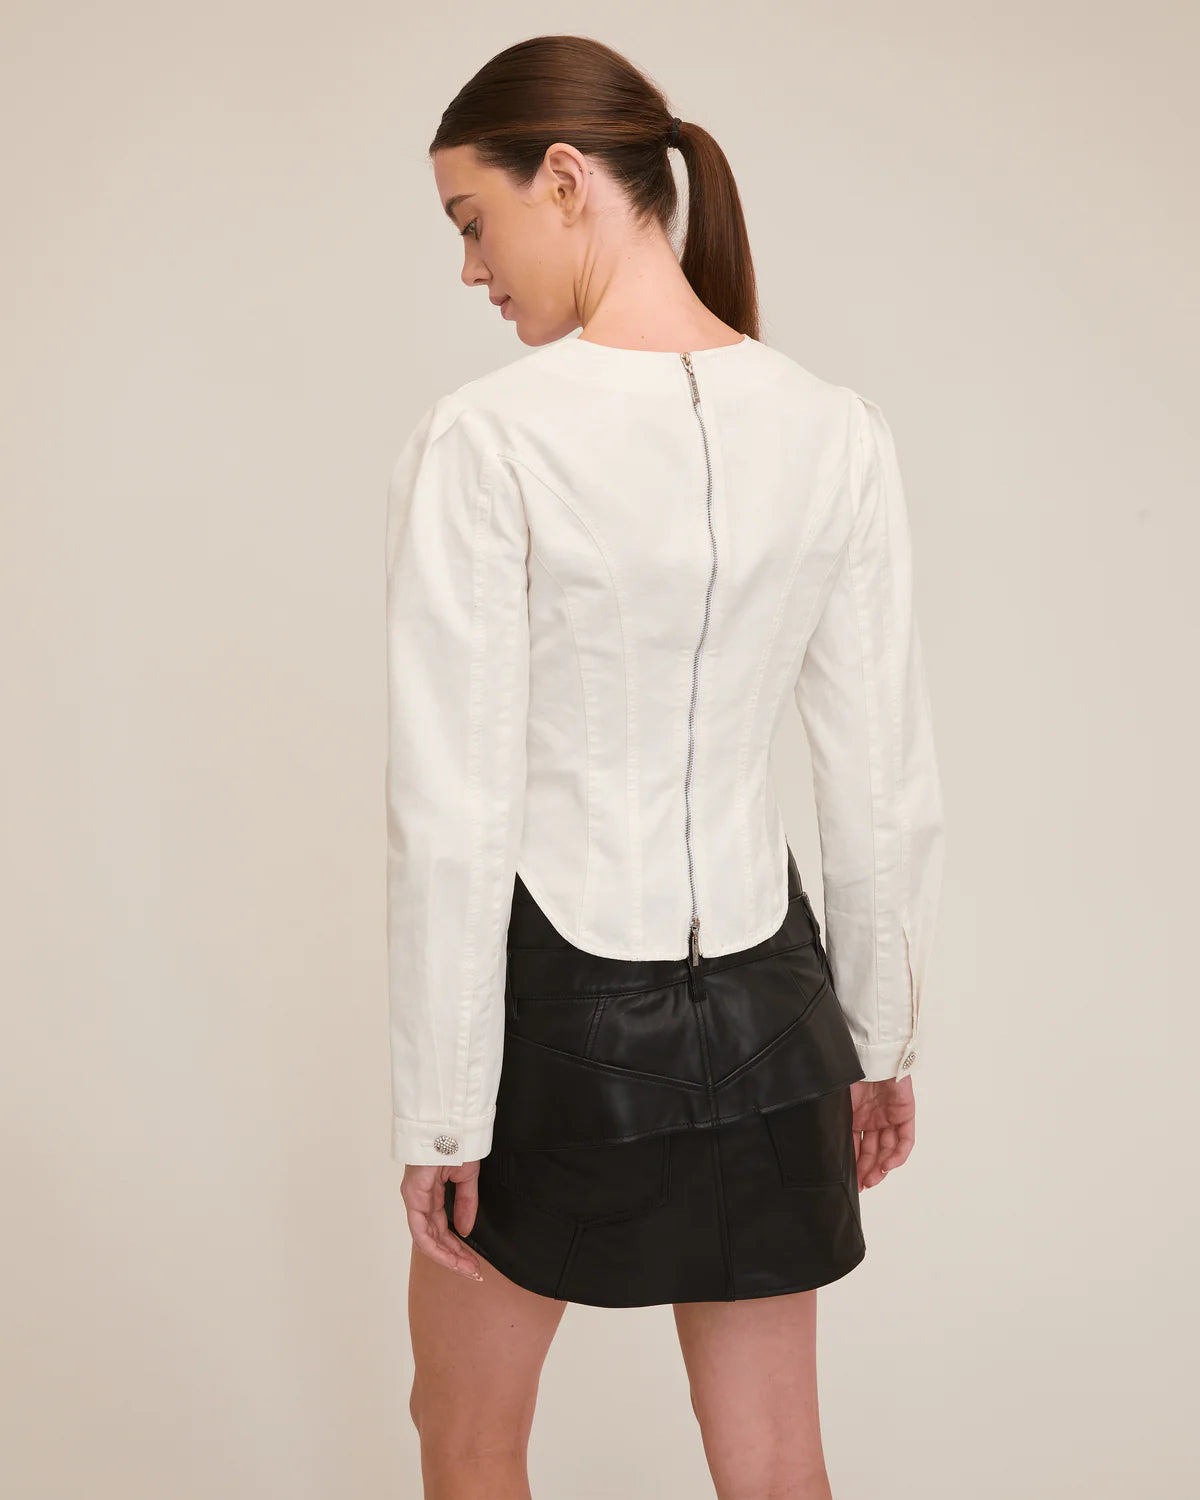 Marissa Webb Lucy Seamed Top, white shirt, fun top, corset styled top, women's clothing